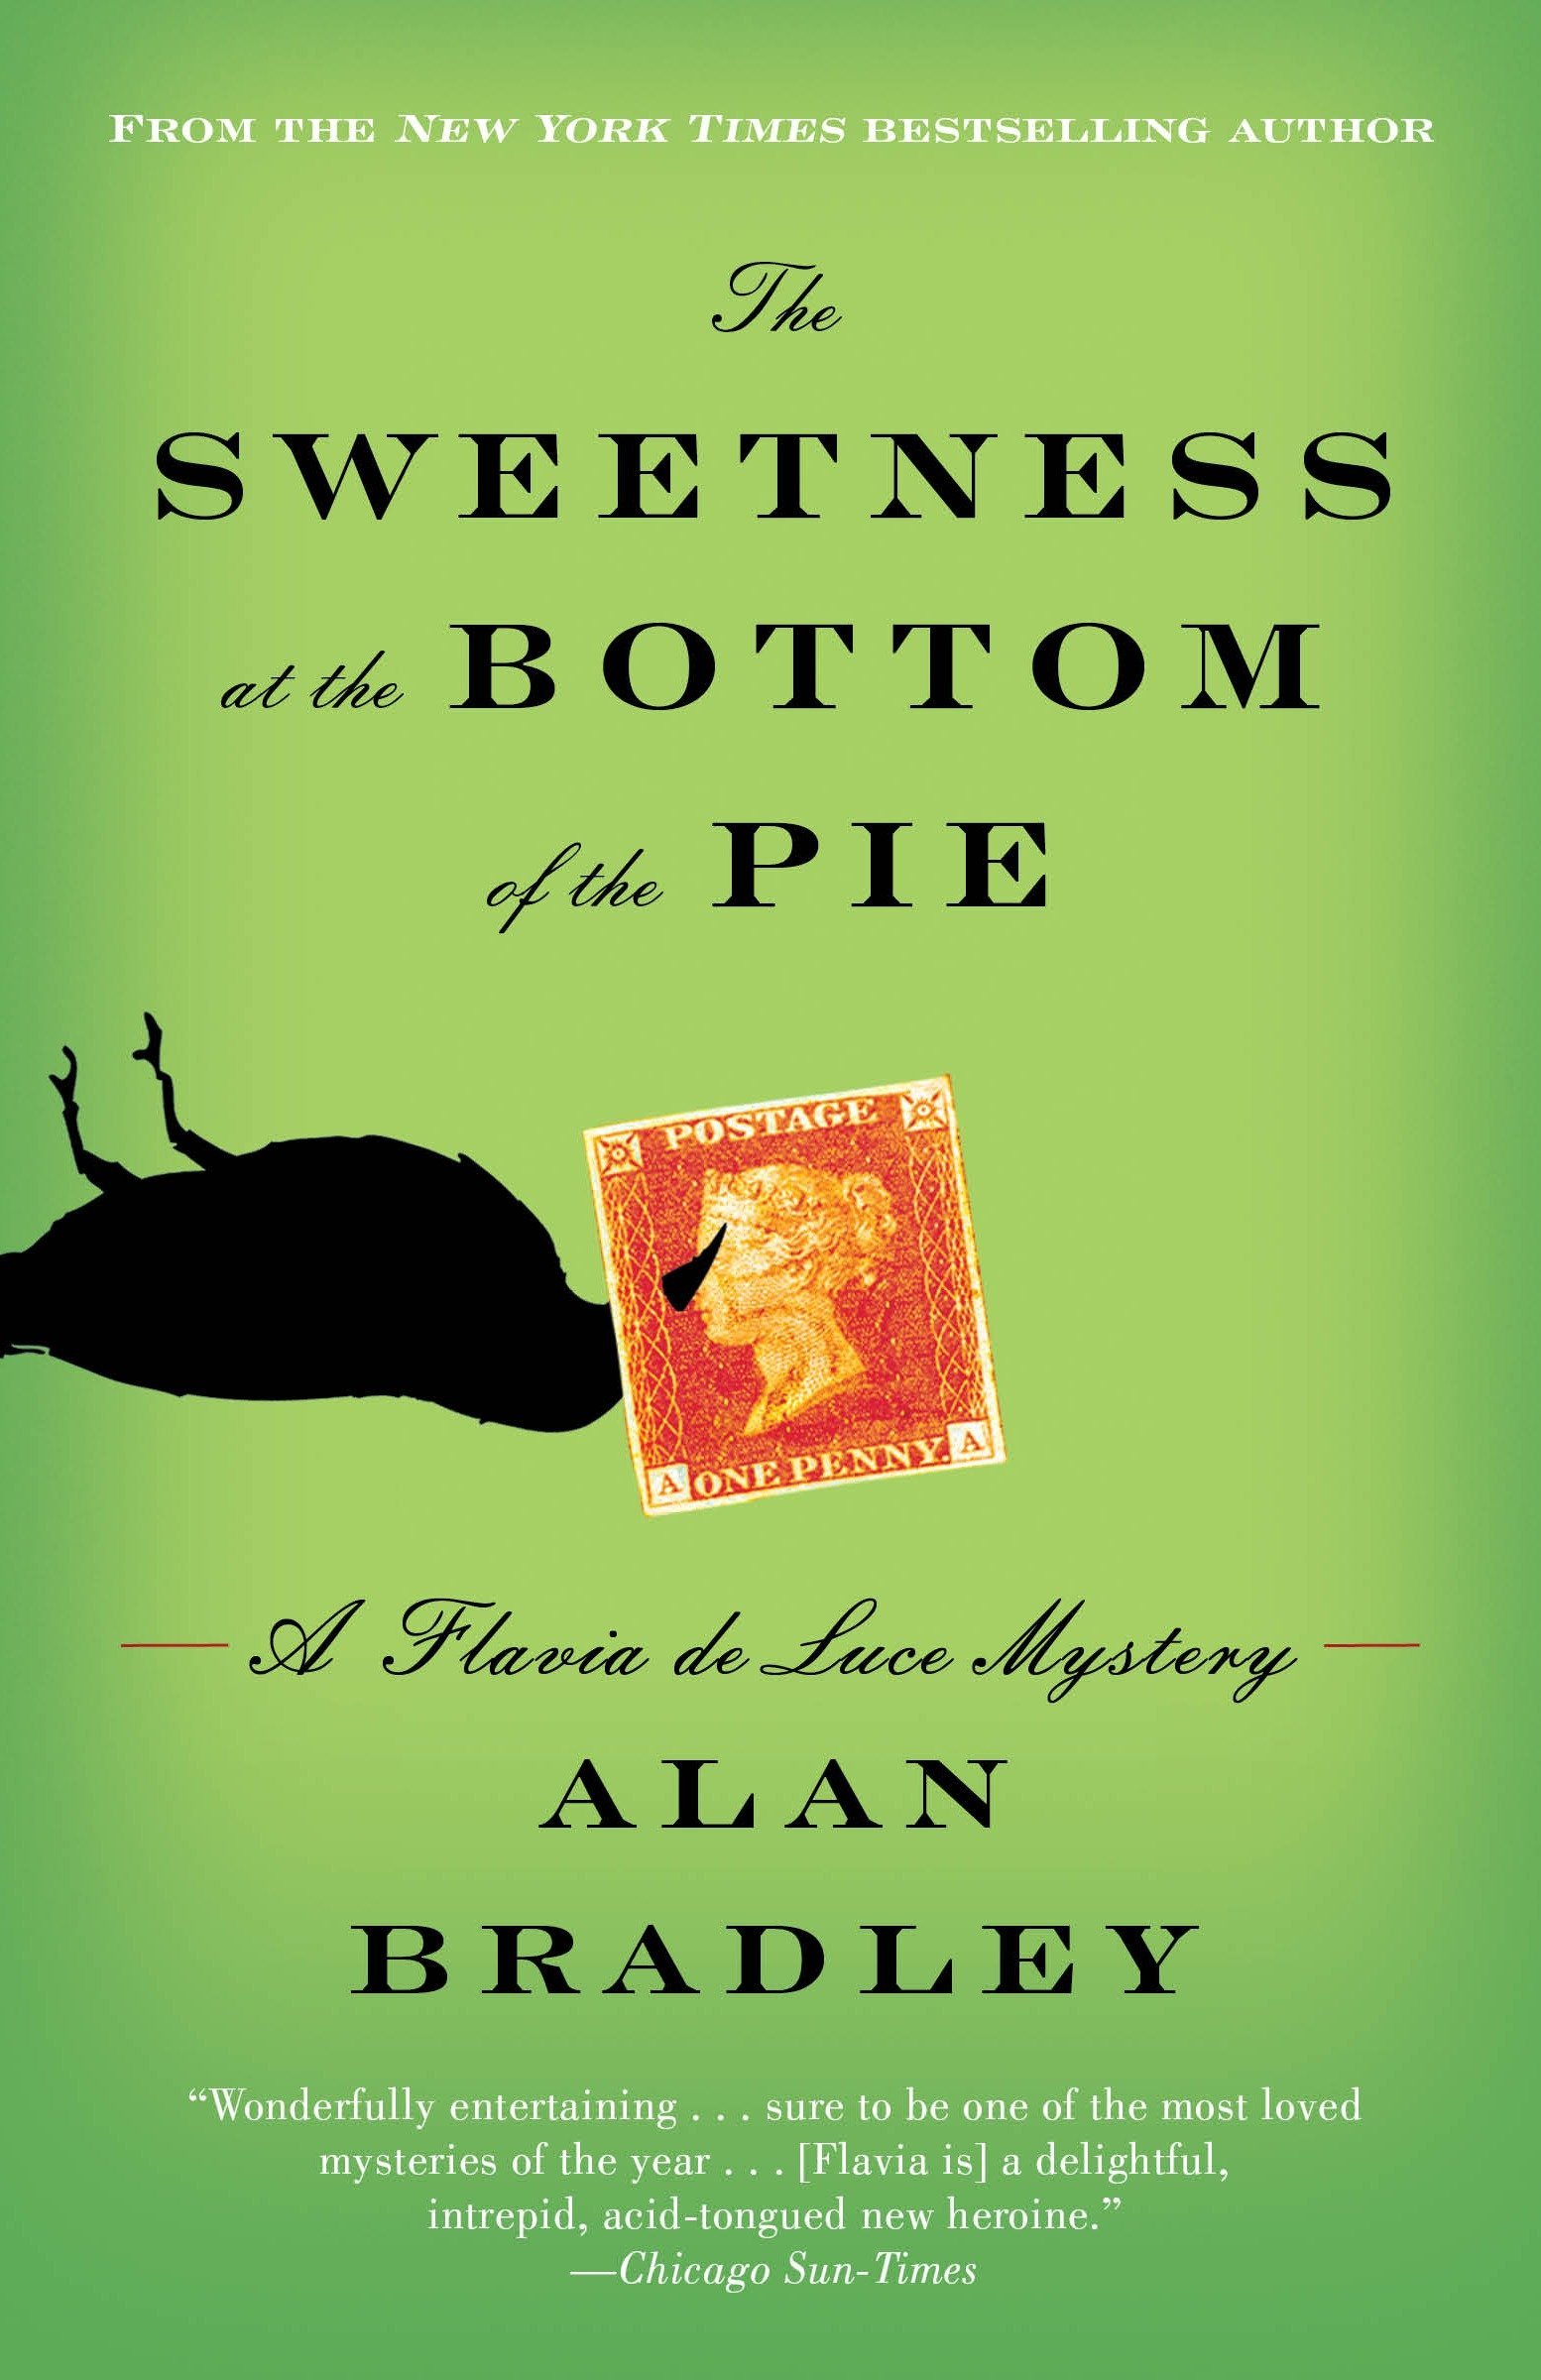 See The Sweetness at the Bottom of the Pie in Library Catalog